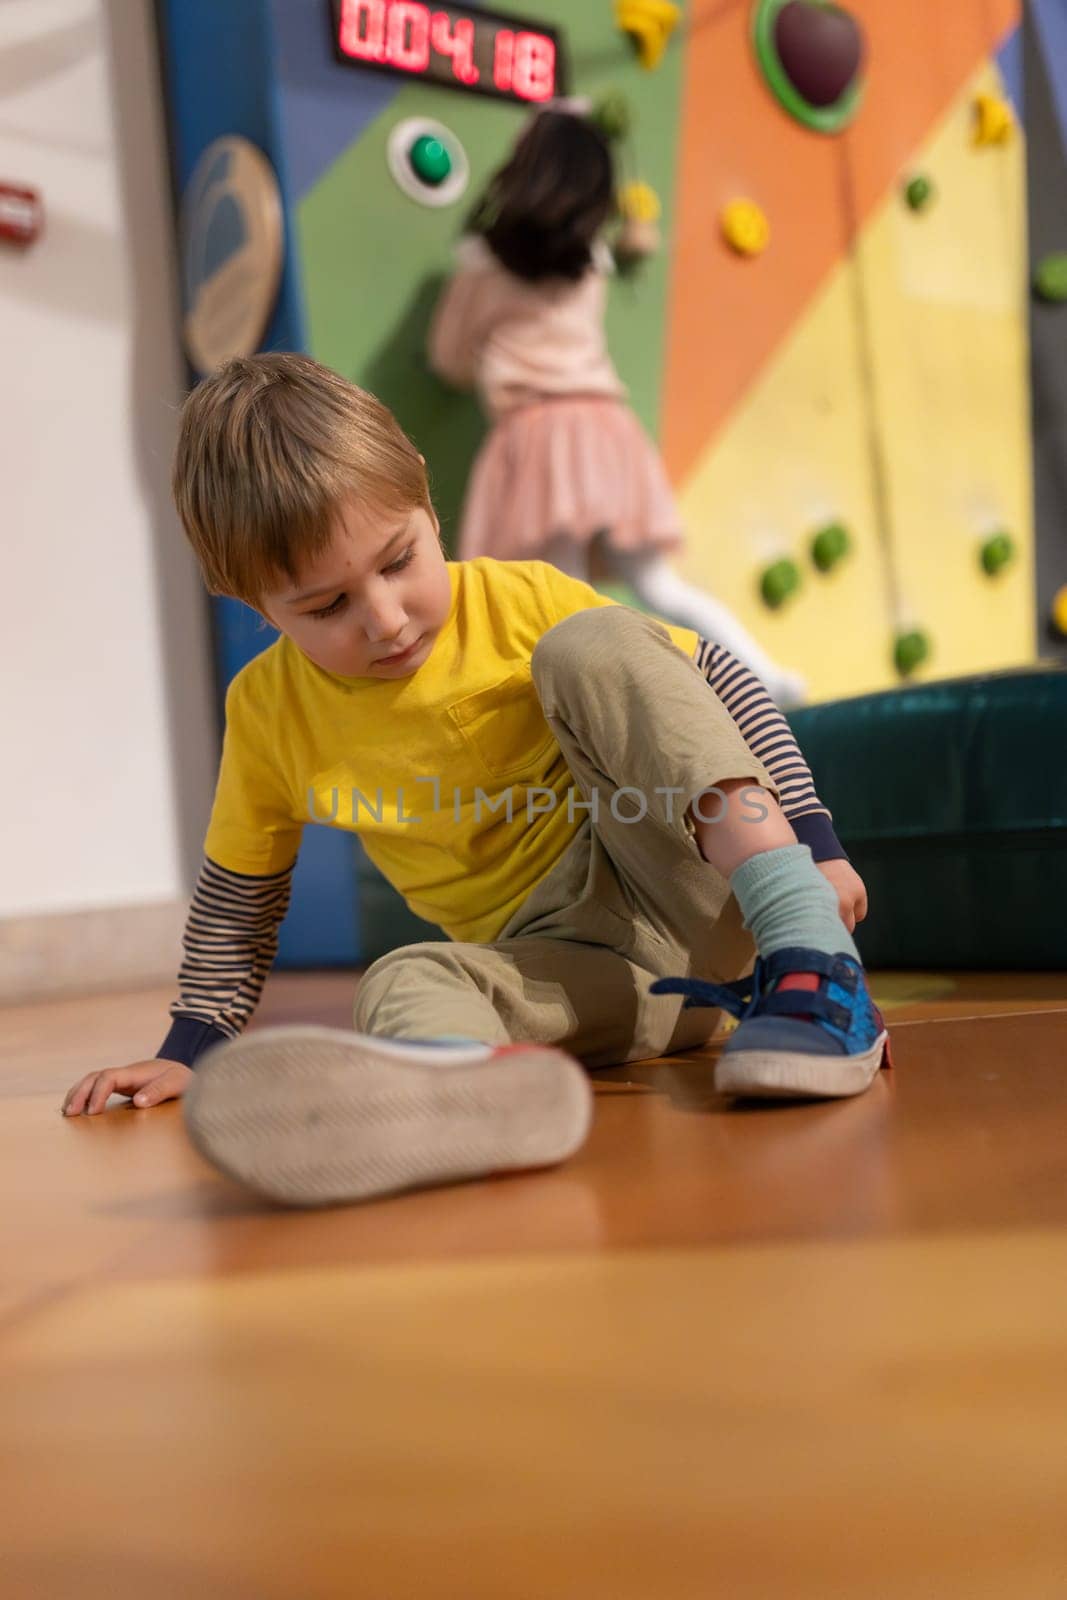 A boy in a yellow shirt is sitting on the floor with his feet up. He is wearing blue shoes